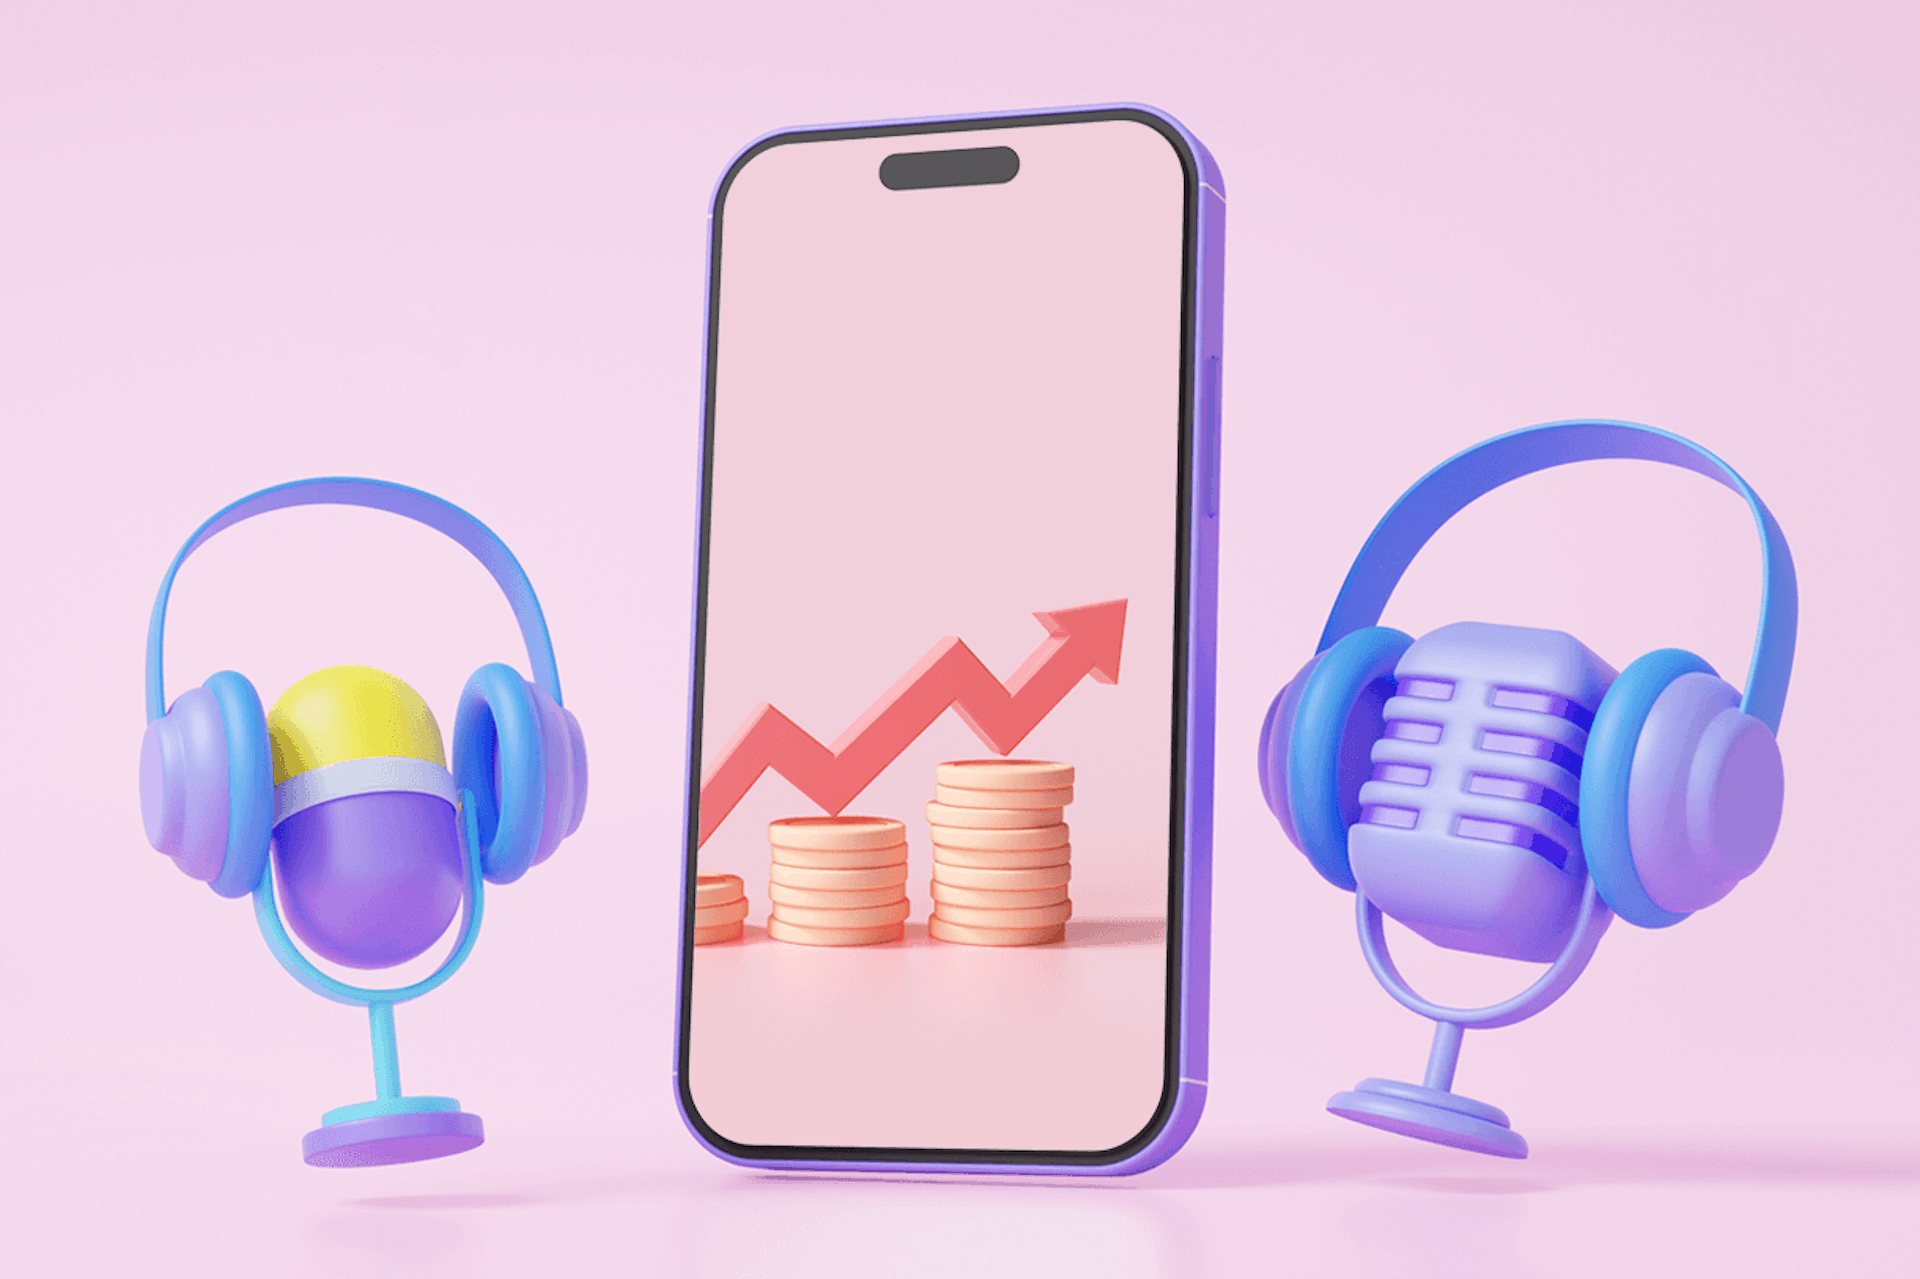 Illustration of a smart phone with an image of an arrow going up and to the right on top of stacked coins. Phone is flanked with two podcast microphones with headphones on. Image for the 20 best finance podcasts blog post